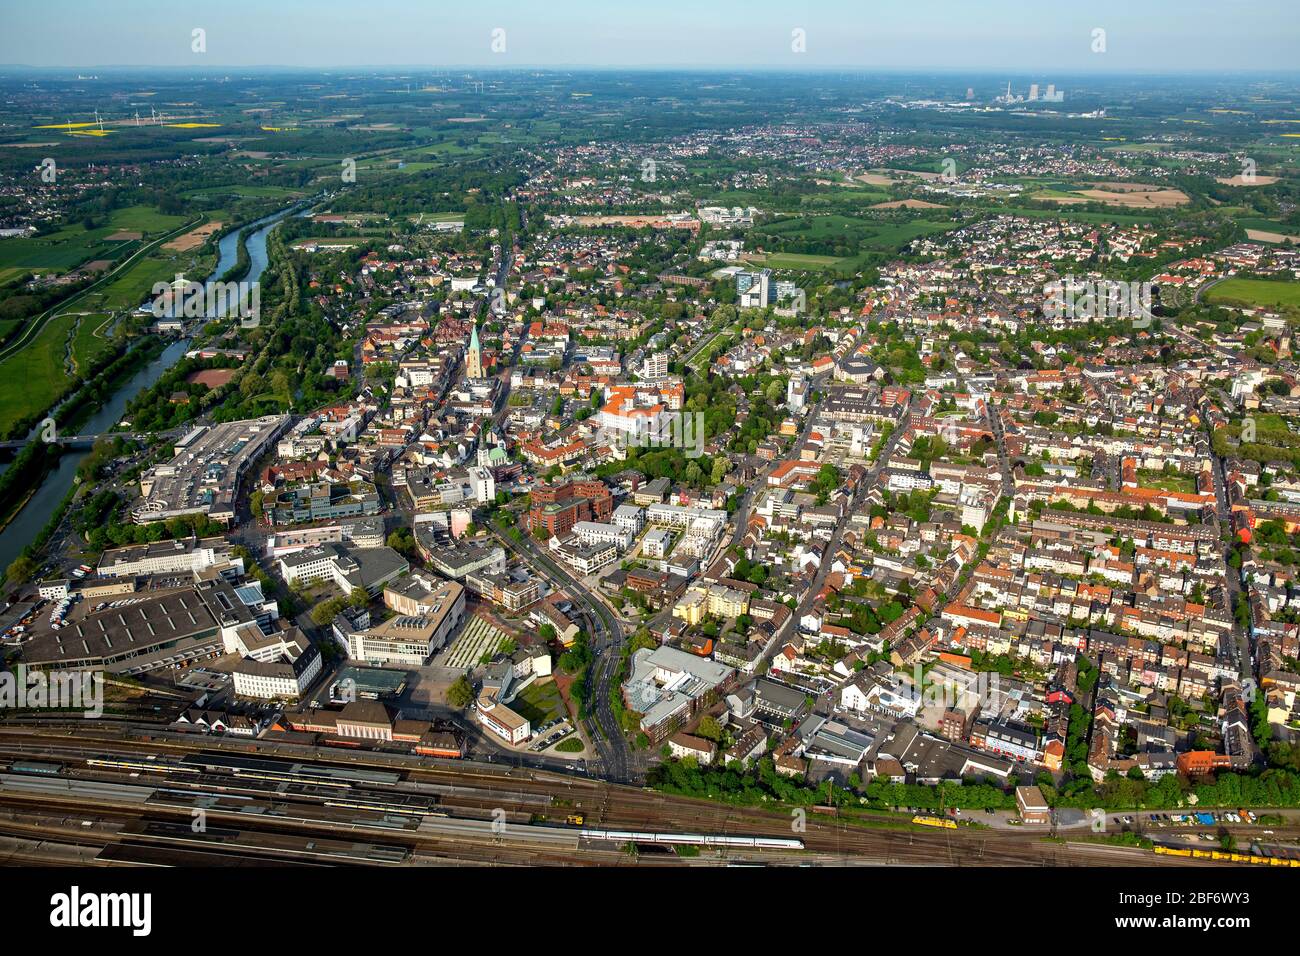 , city centre of Hamm with main station, 09.05.2016, aerial view, Germany, North Rhine-Westphalia, Ruhr Area, Hamm Stock Photo